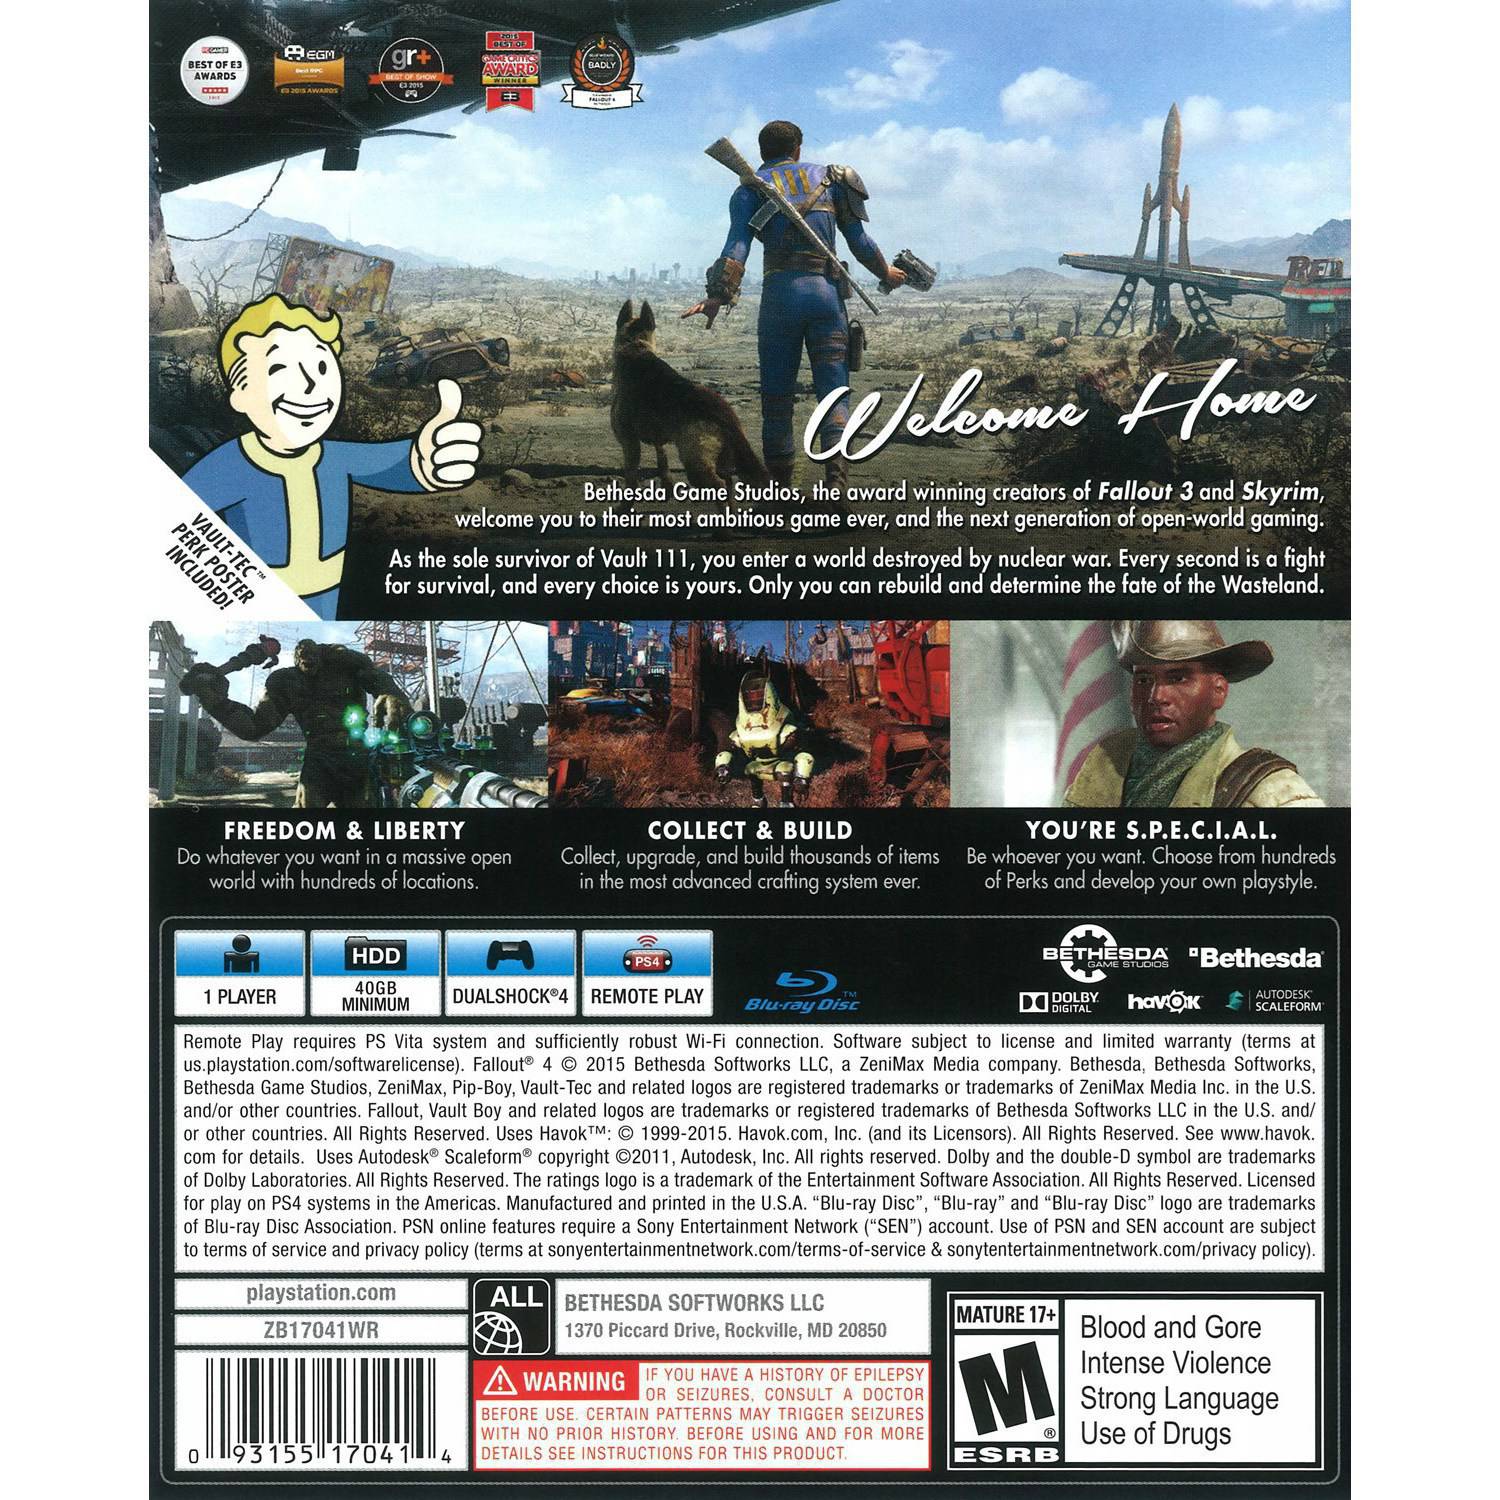 Fallout 4, Bethesda Softworks, PlayStation 4, [Physical], 093155170414 - image 2 of 9